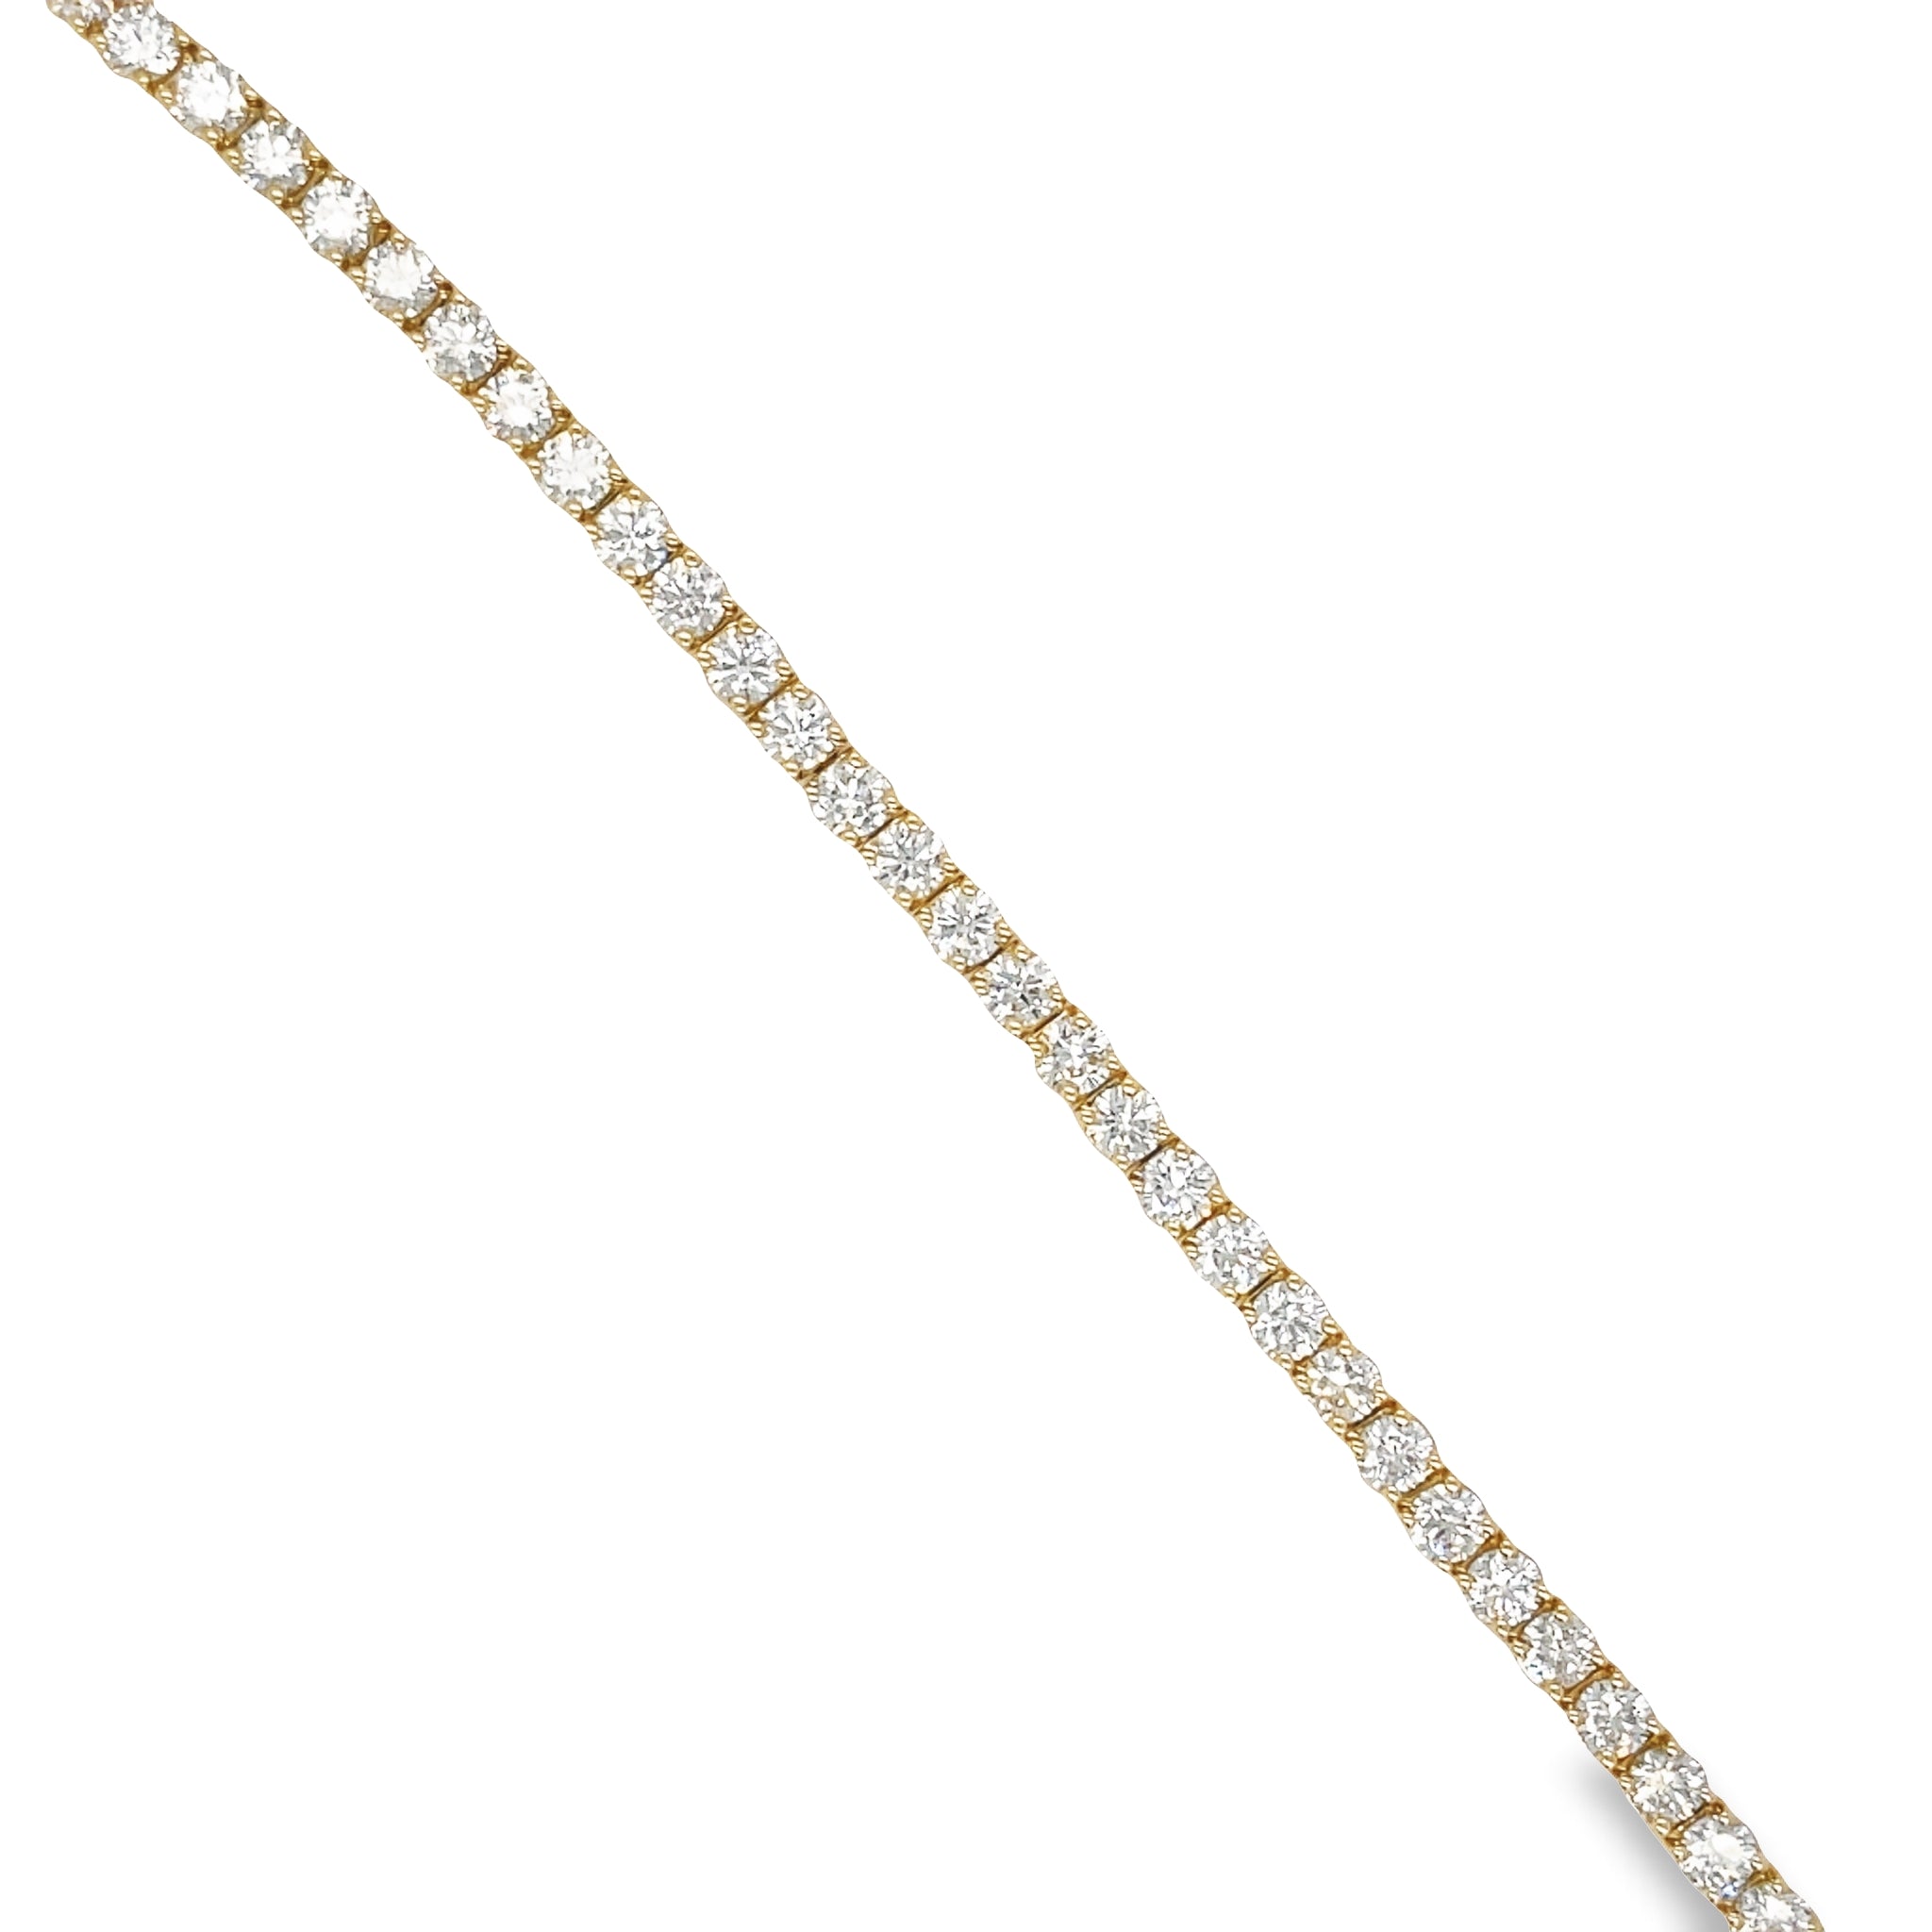 This Diamond Line Tennis Bracelet is crafted with 14k yellow gold and is encrusted with 6.51 carats of brilliant diamonds, color J and clarity VS1. The 7' length is secured with a hidden clasp for a subtle and elegant finish. Perfect for special occasions, this timeless piece will make a striking addition to any jewelry collection.